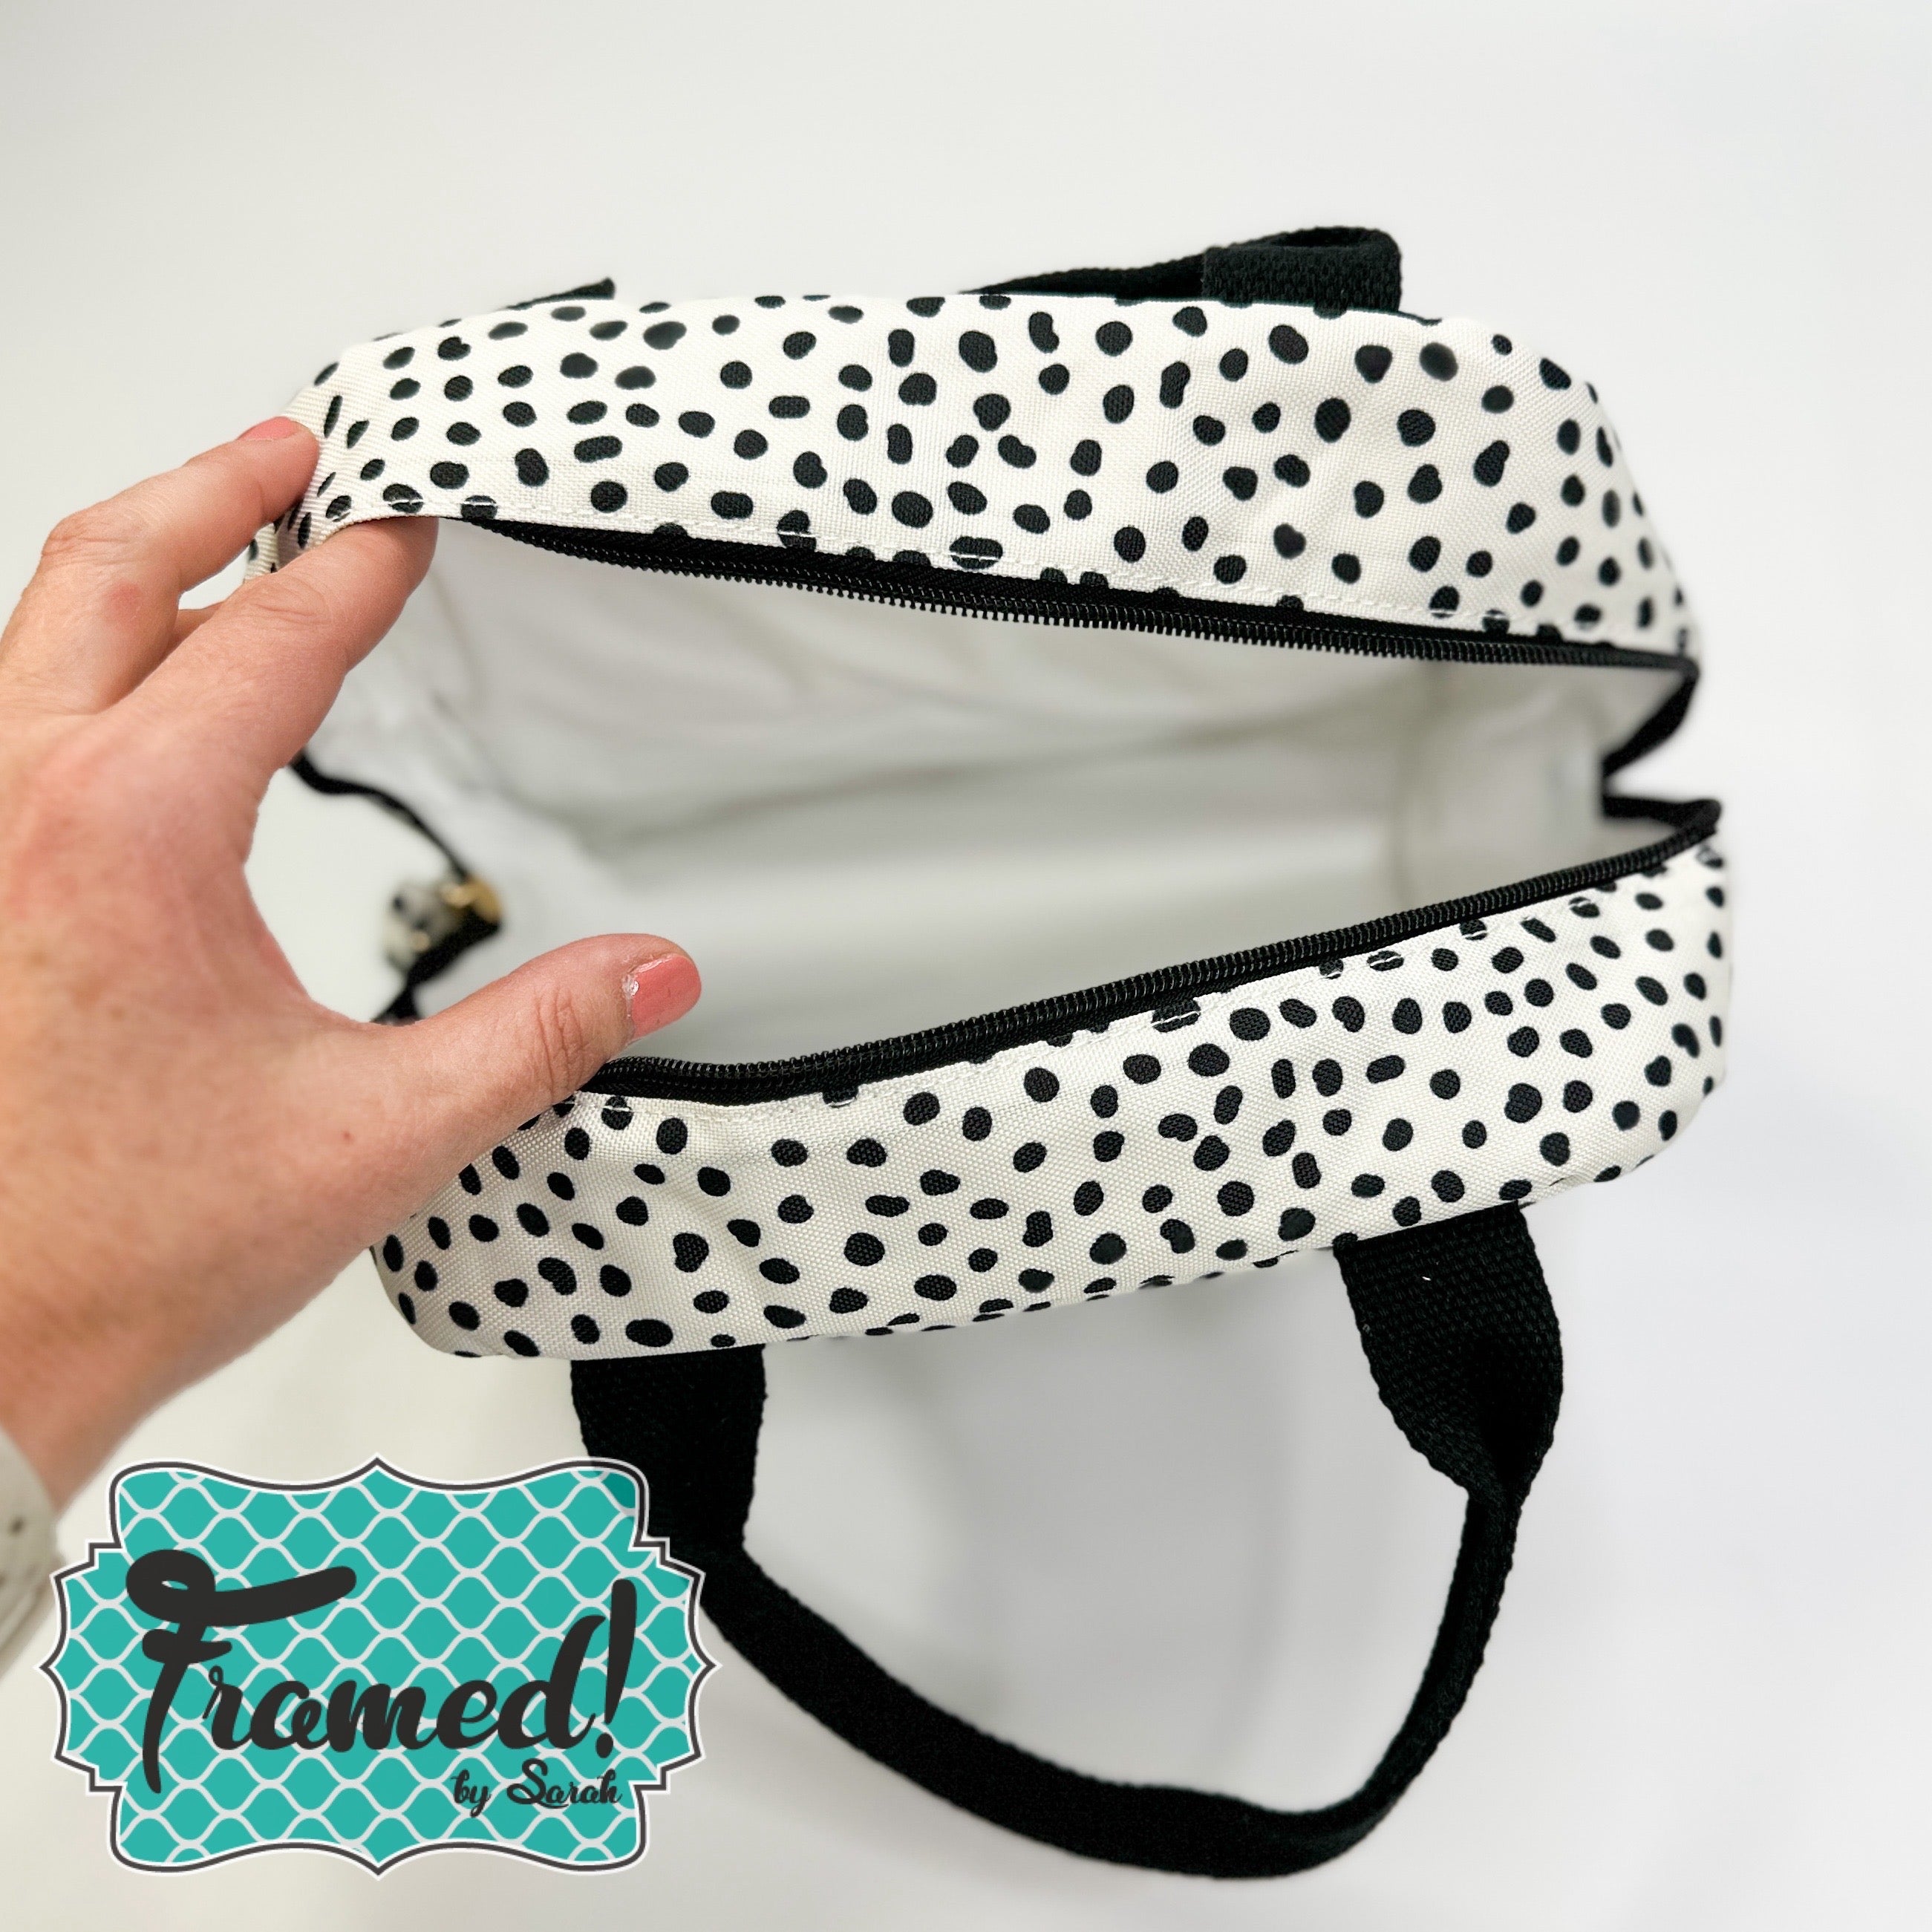 Black & White Spotted Insulated Lunch Tote